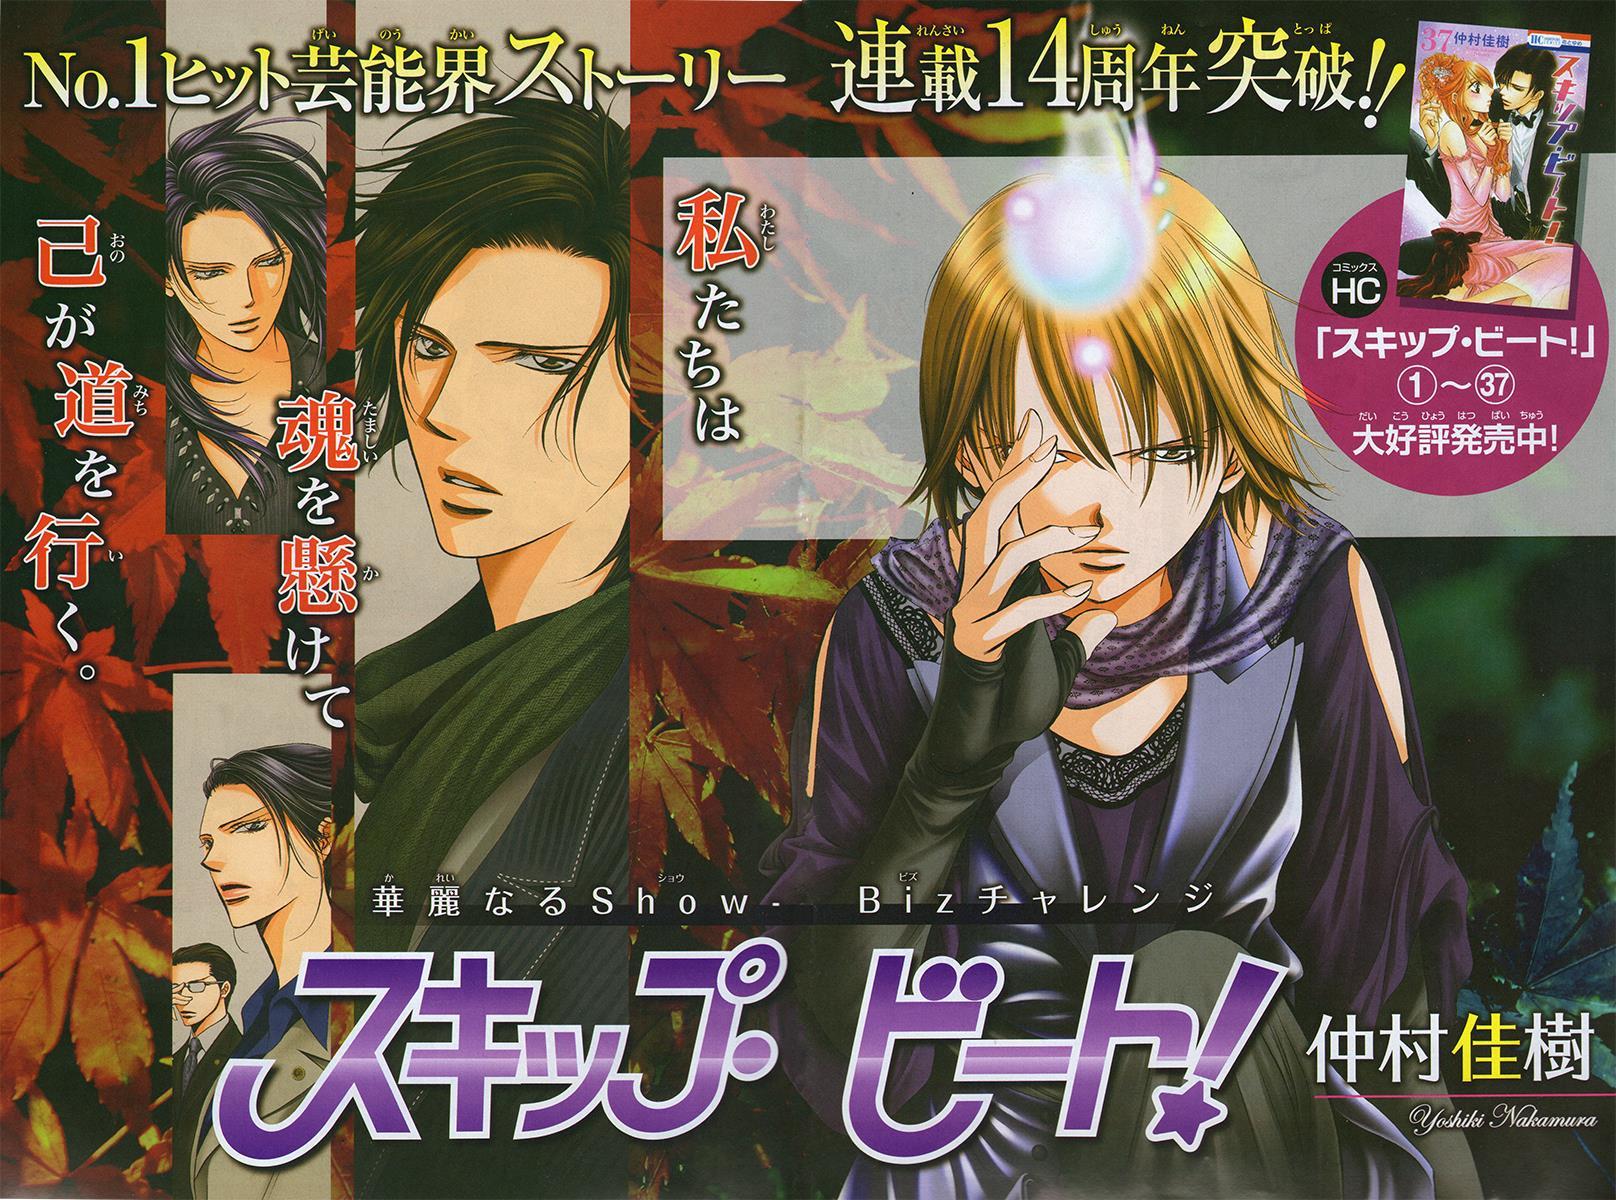 Skip Beat!, Chapter 232 Endless Give Up image 01